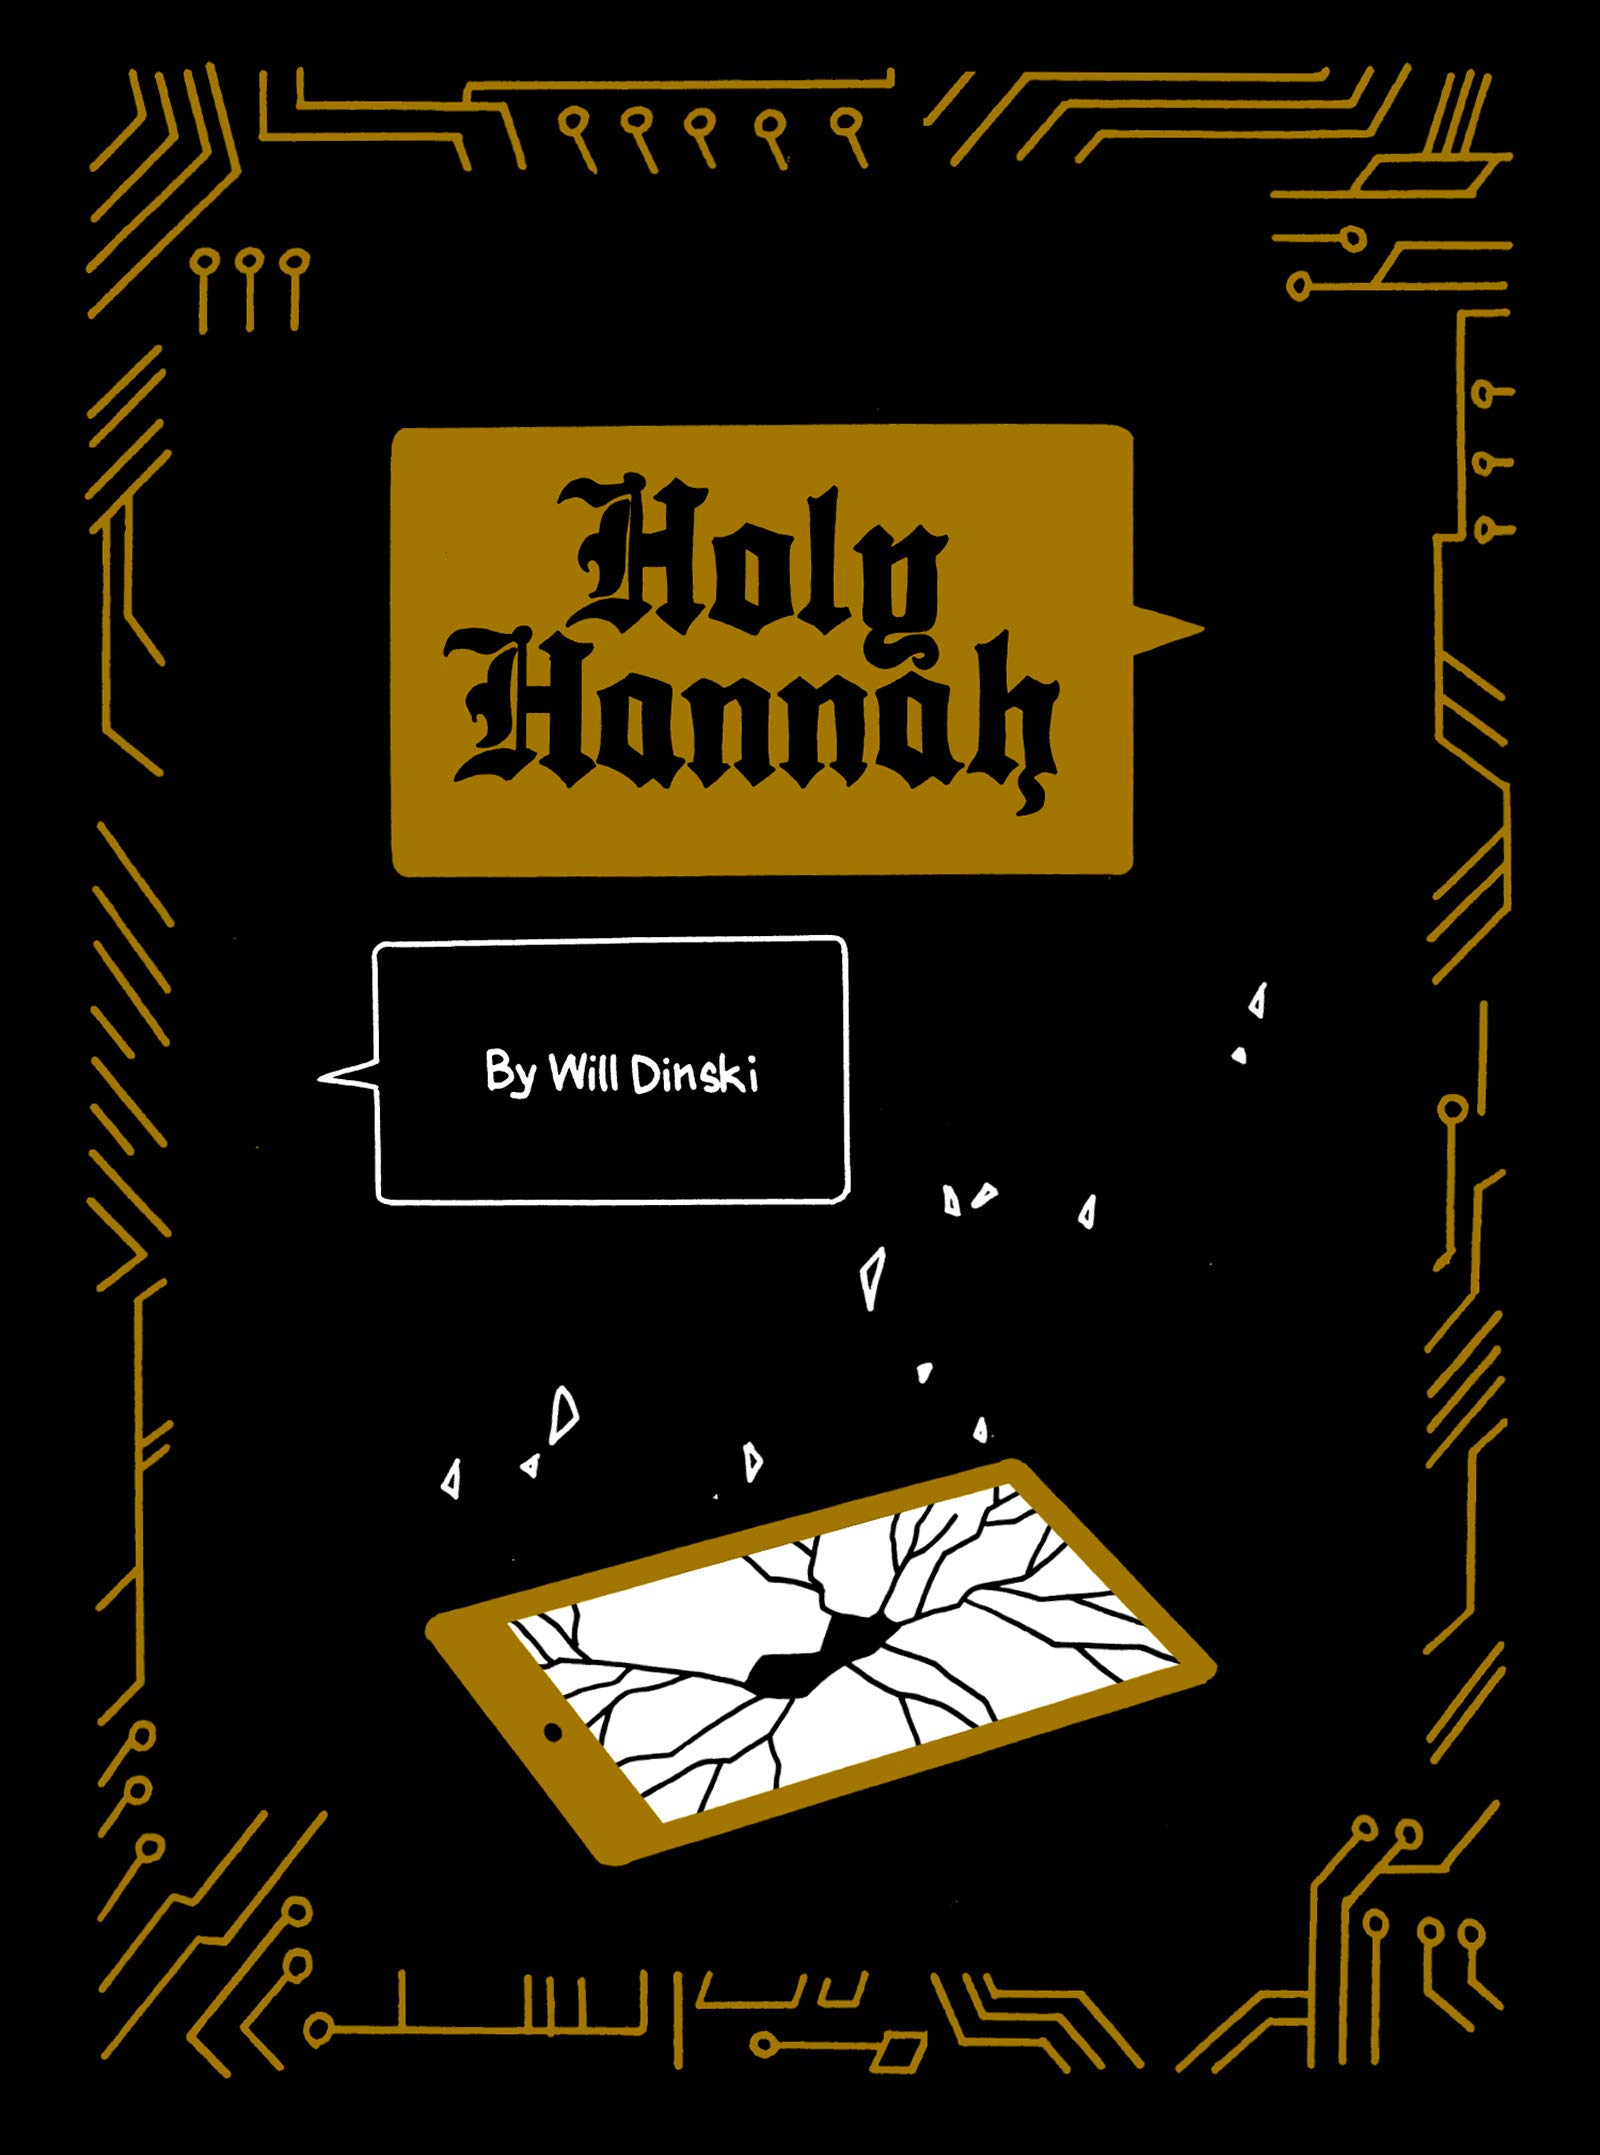 Graphic Novels for Fall 2019: Holy Hannah